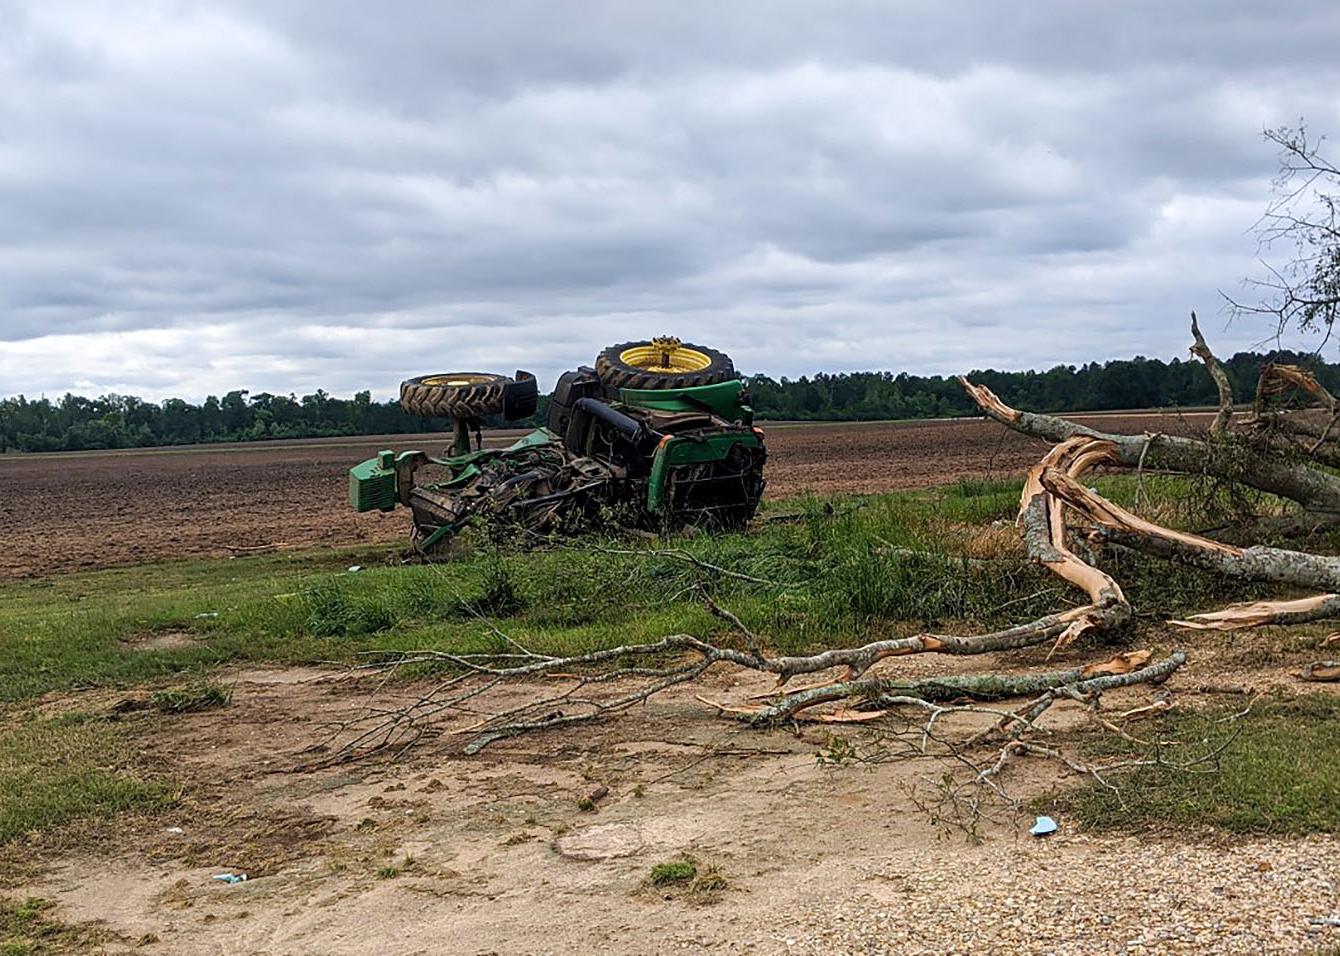 Green tractor flipped on its side in a field.